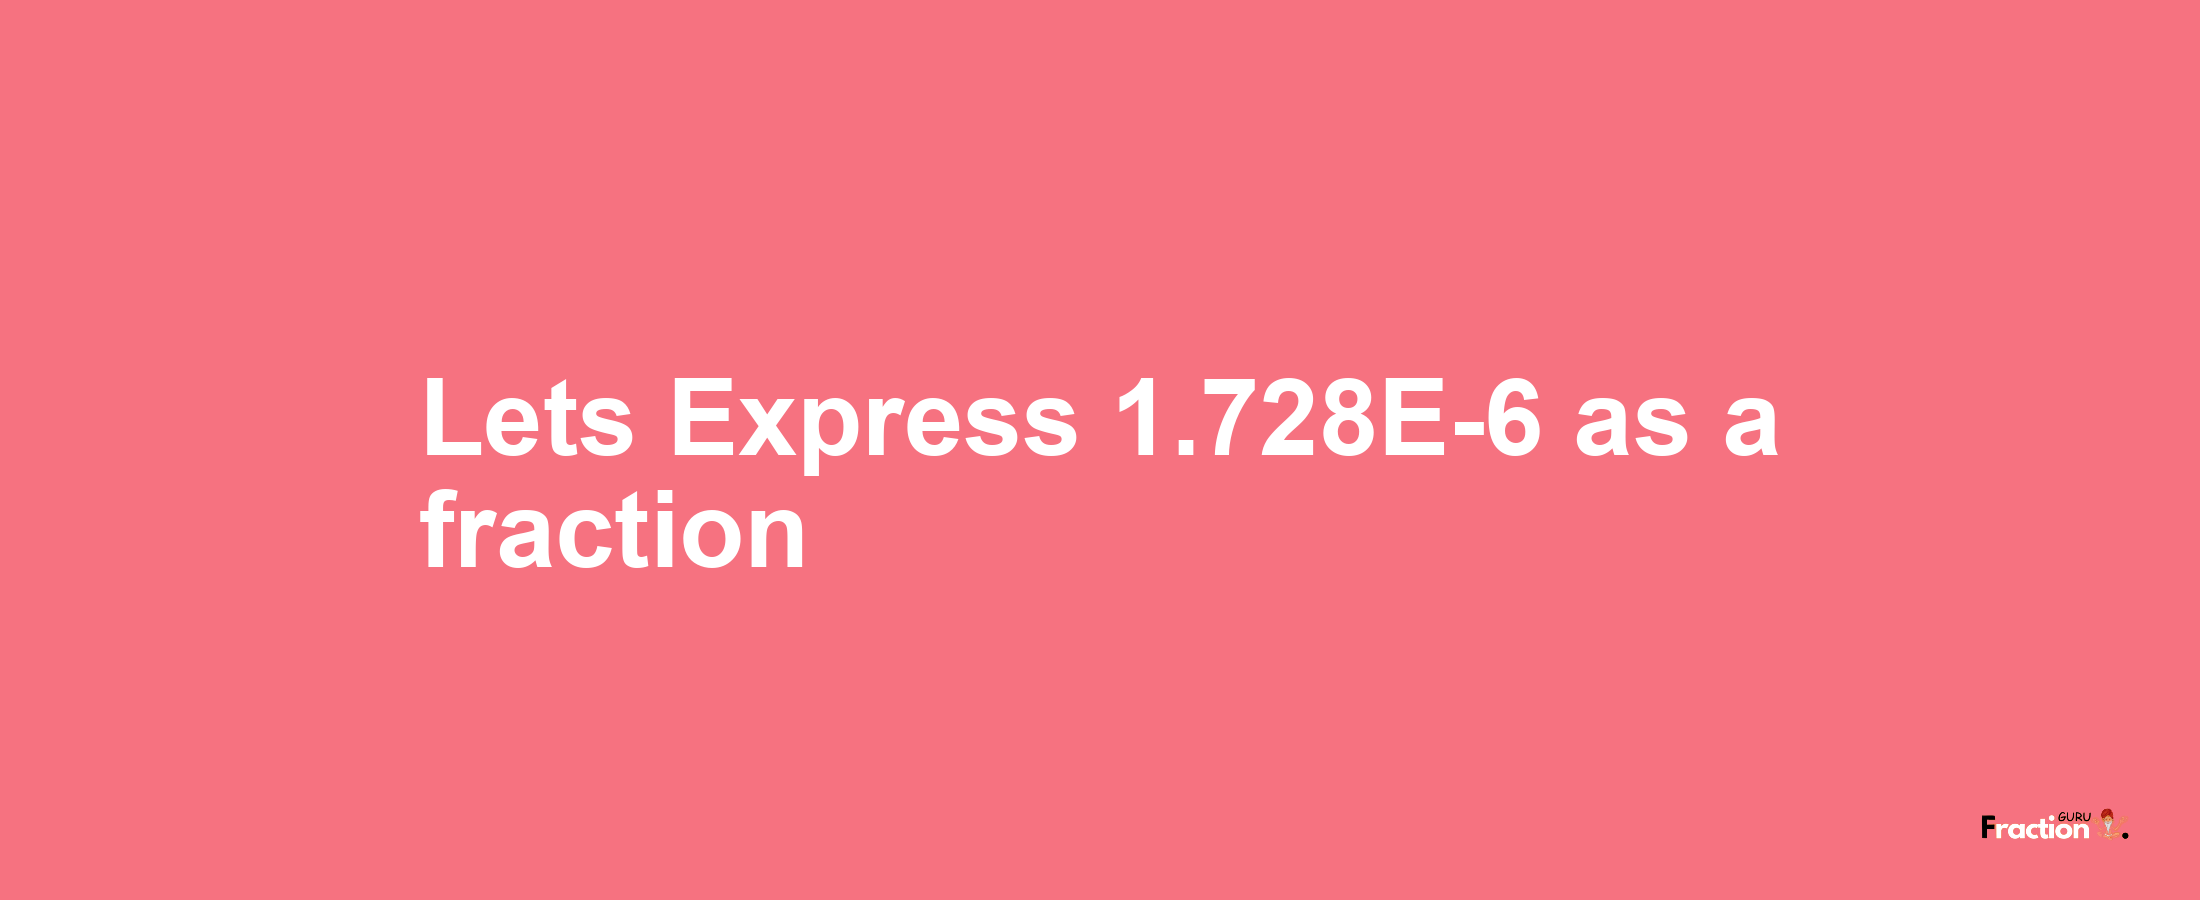 Lets Express 1.728E-6 as afraction